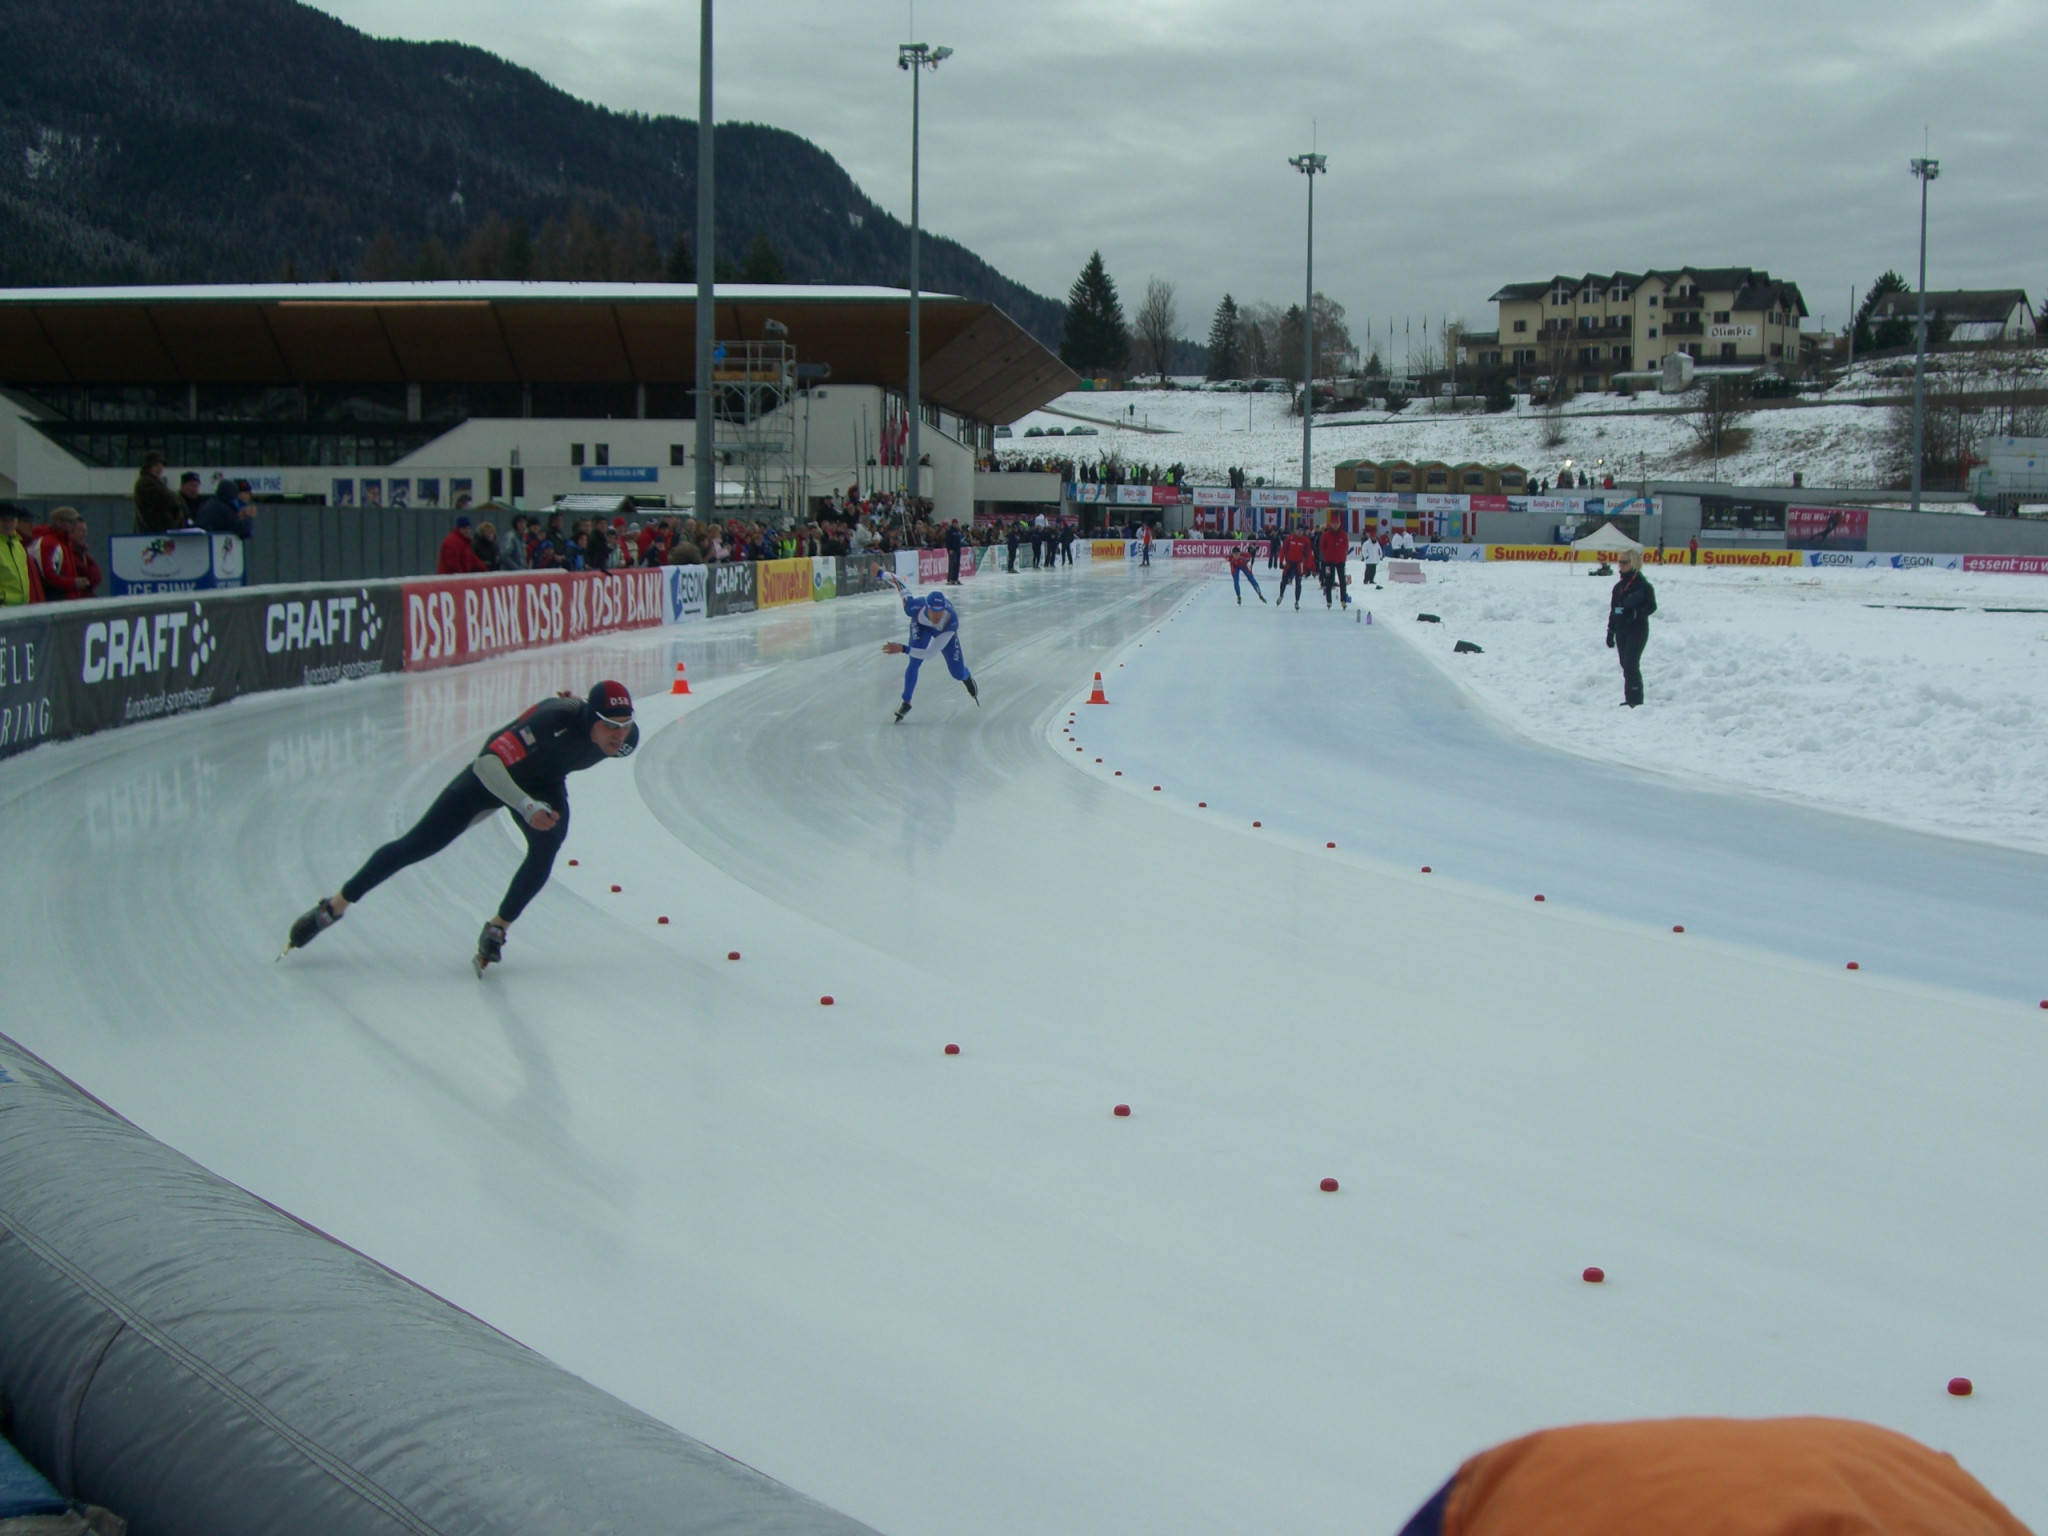 The speed skating oval at Baselga di Piné is an outdoor venue and the ISU would prefer an indoor arena ©Olympic Hotel